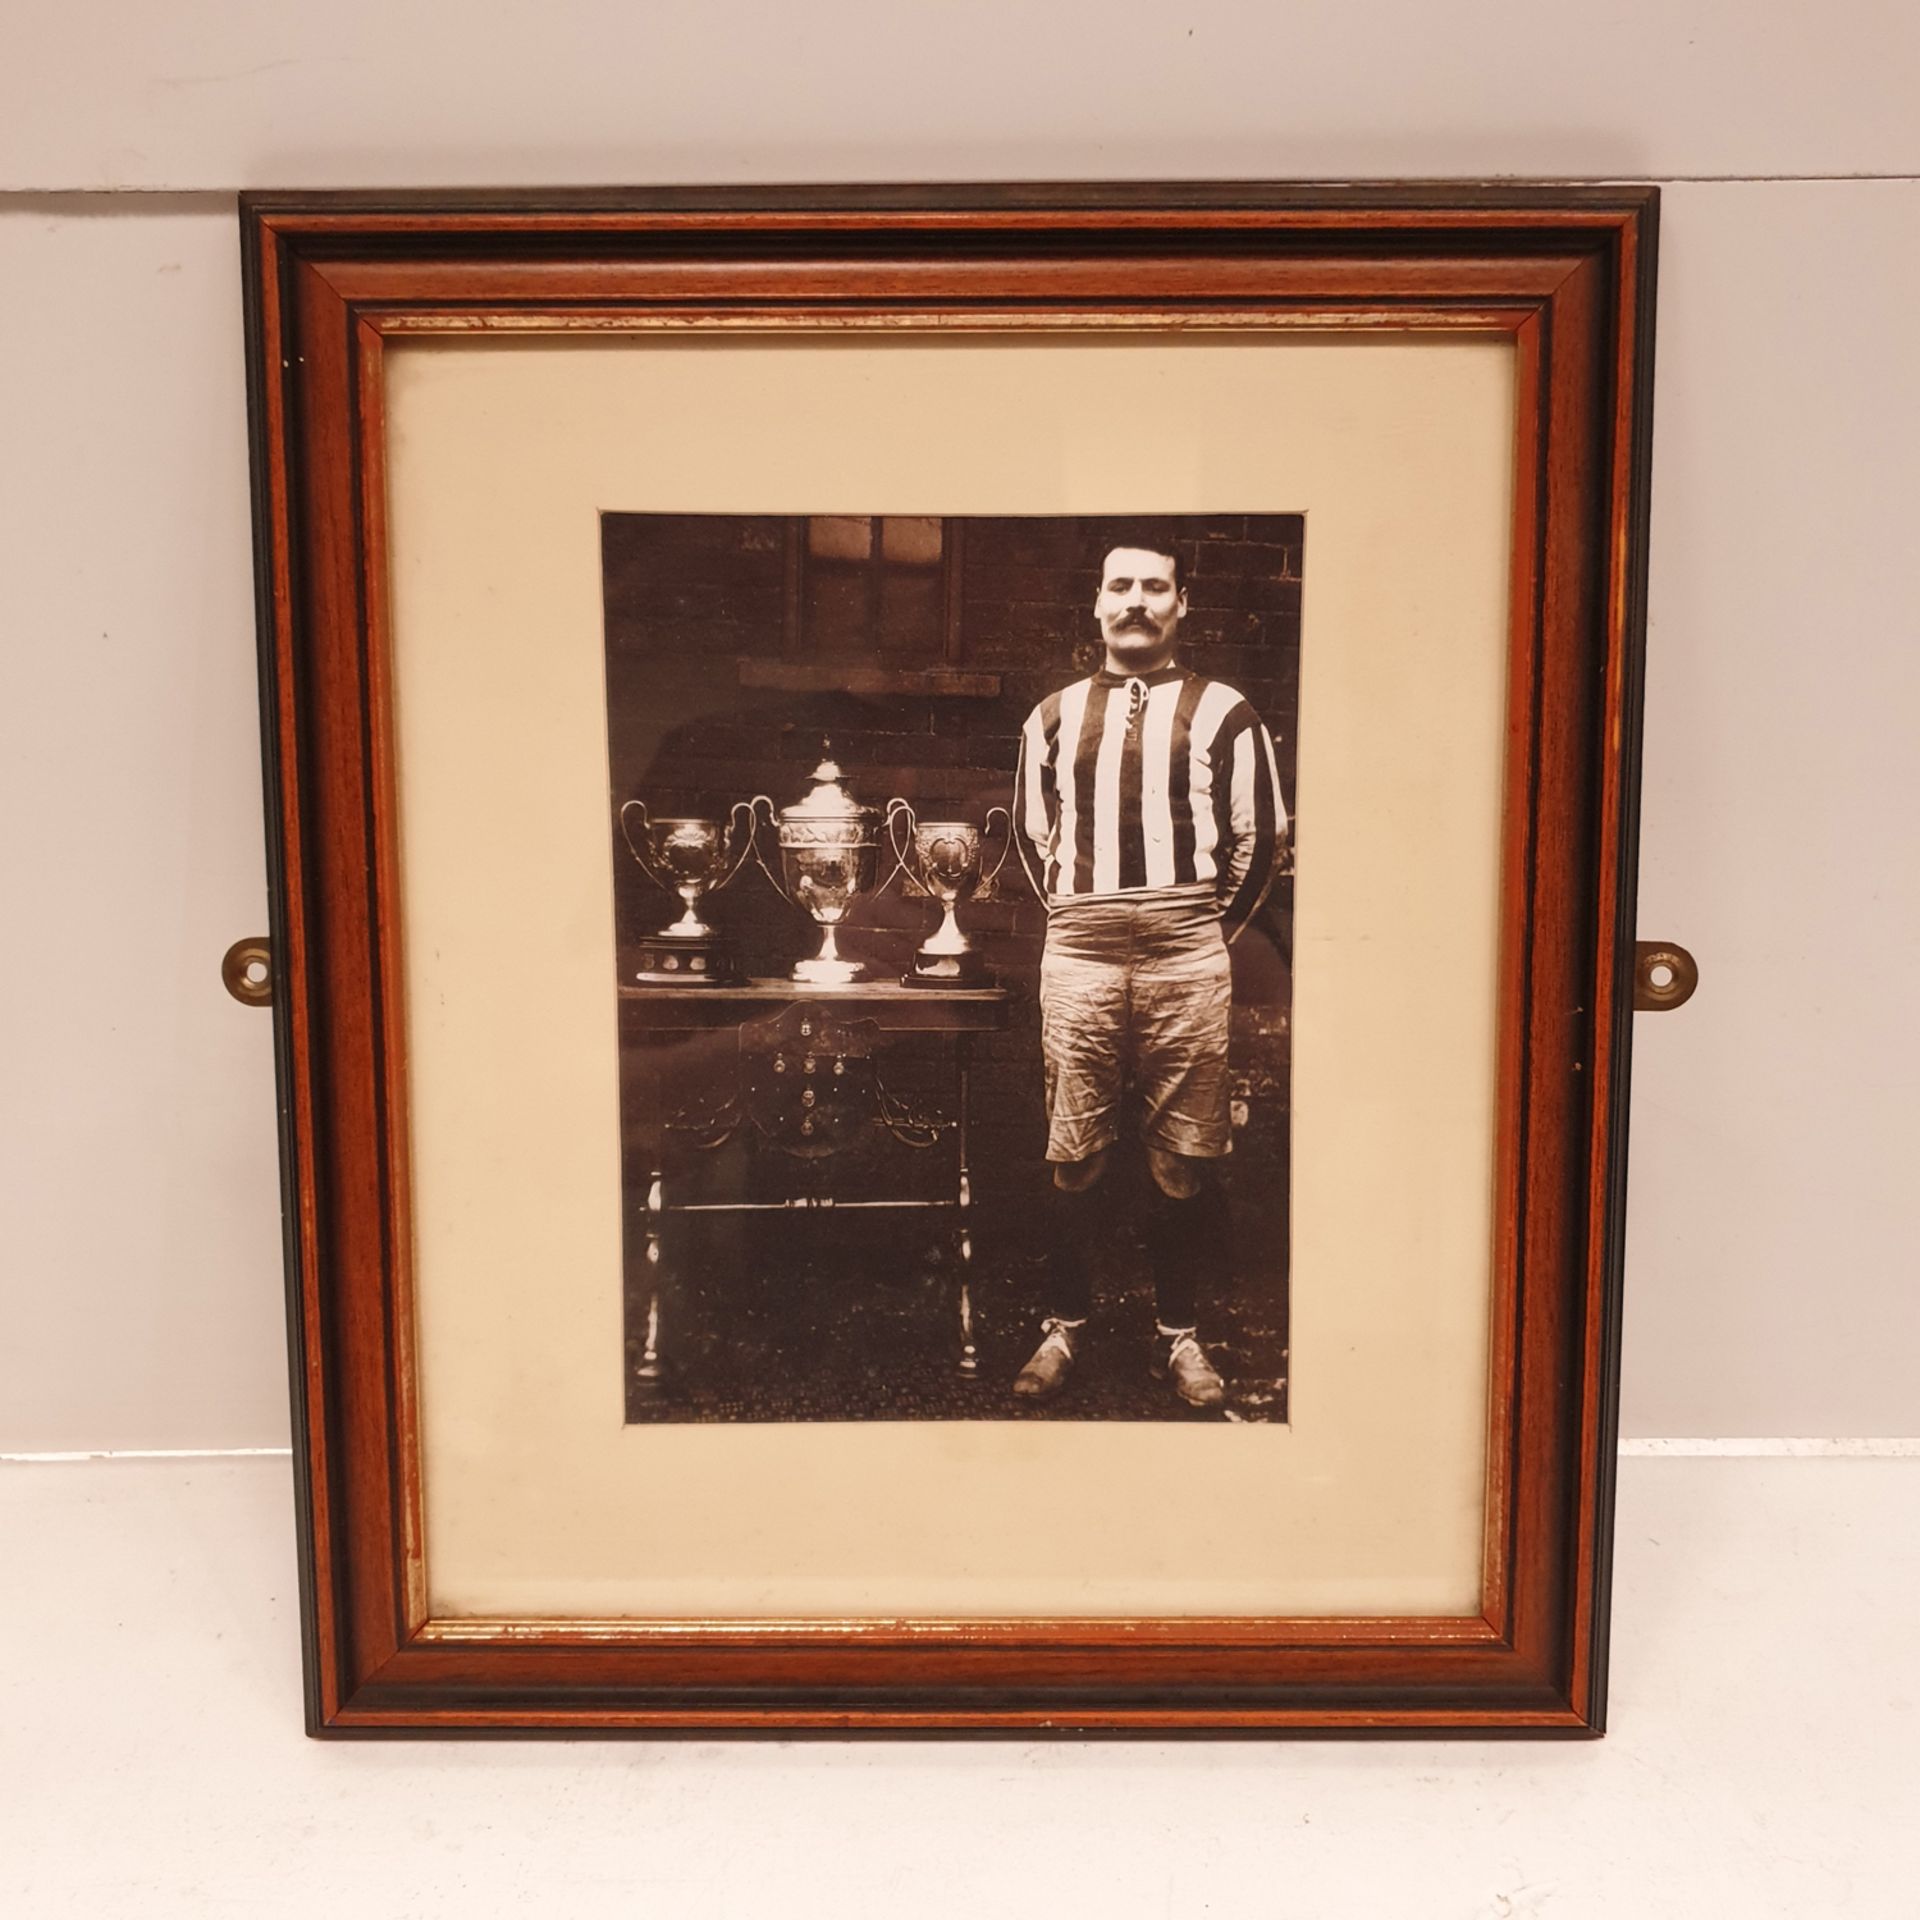 Football Trophies Framed Picture. Approx Dimensions 14 1/4" x 16 1/2".